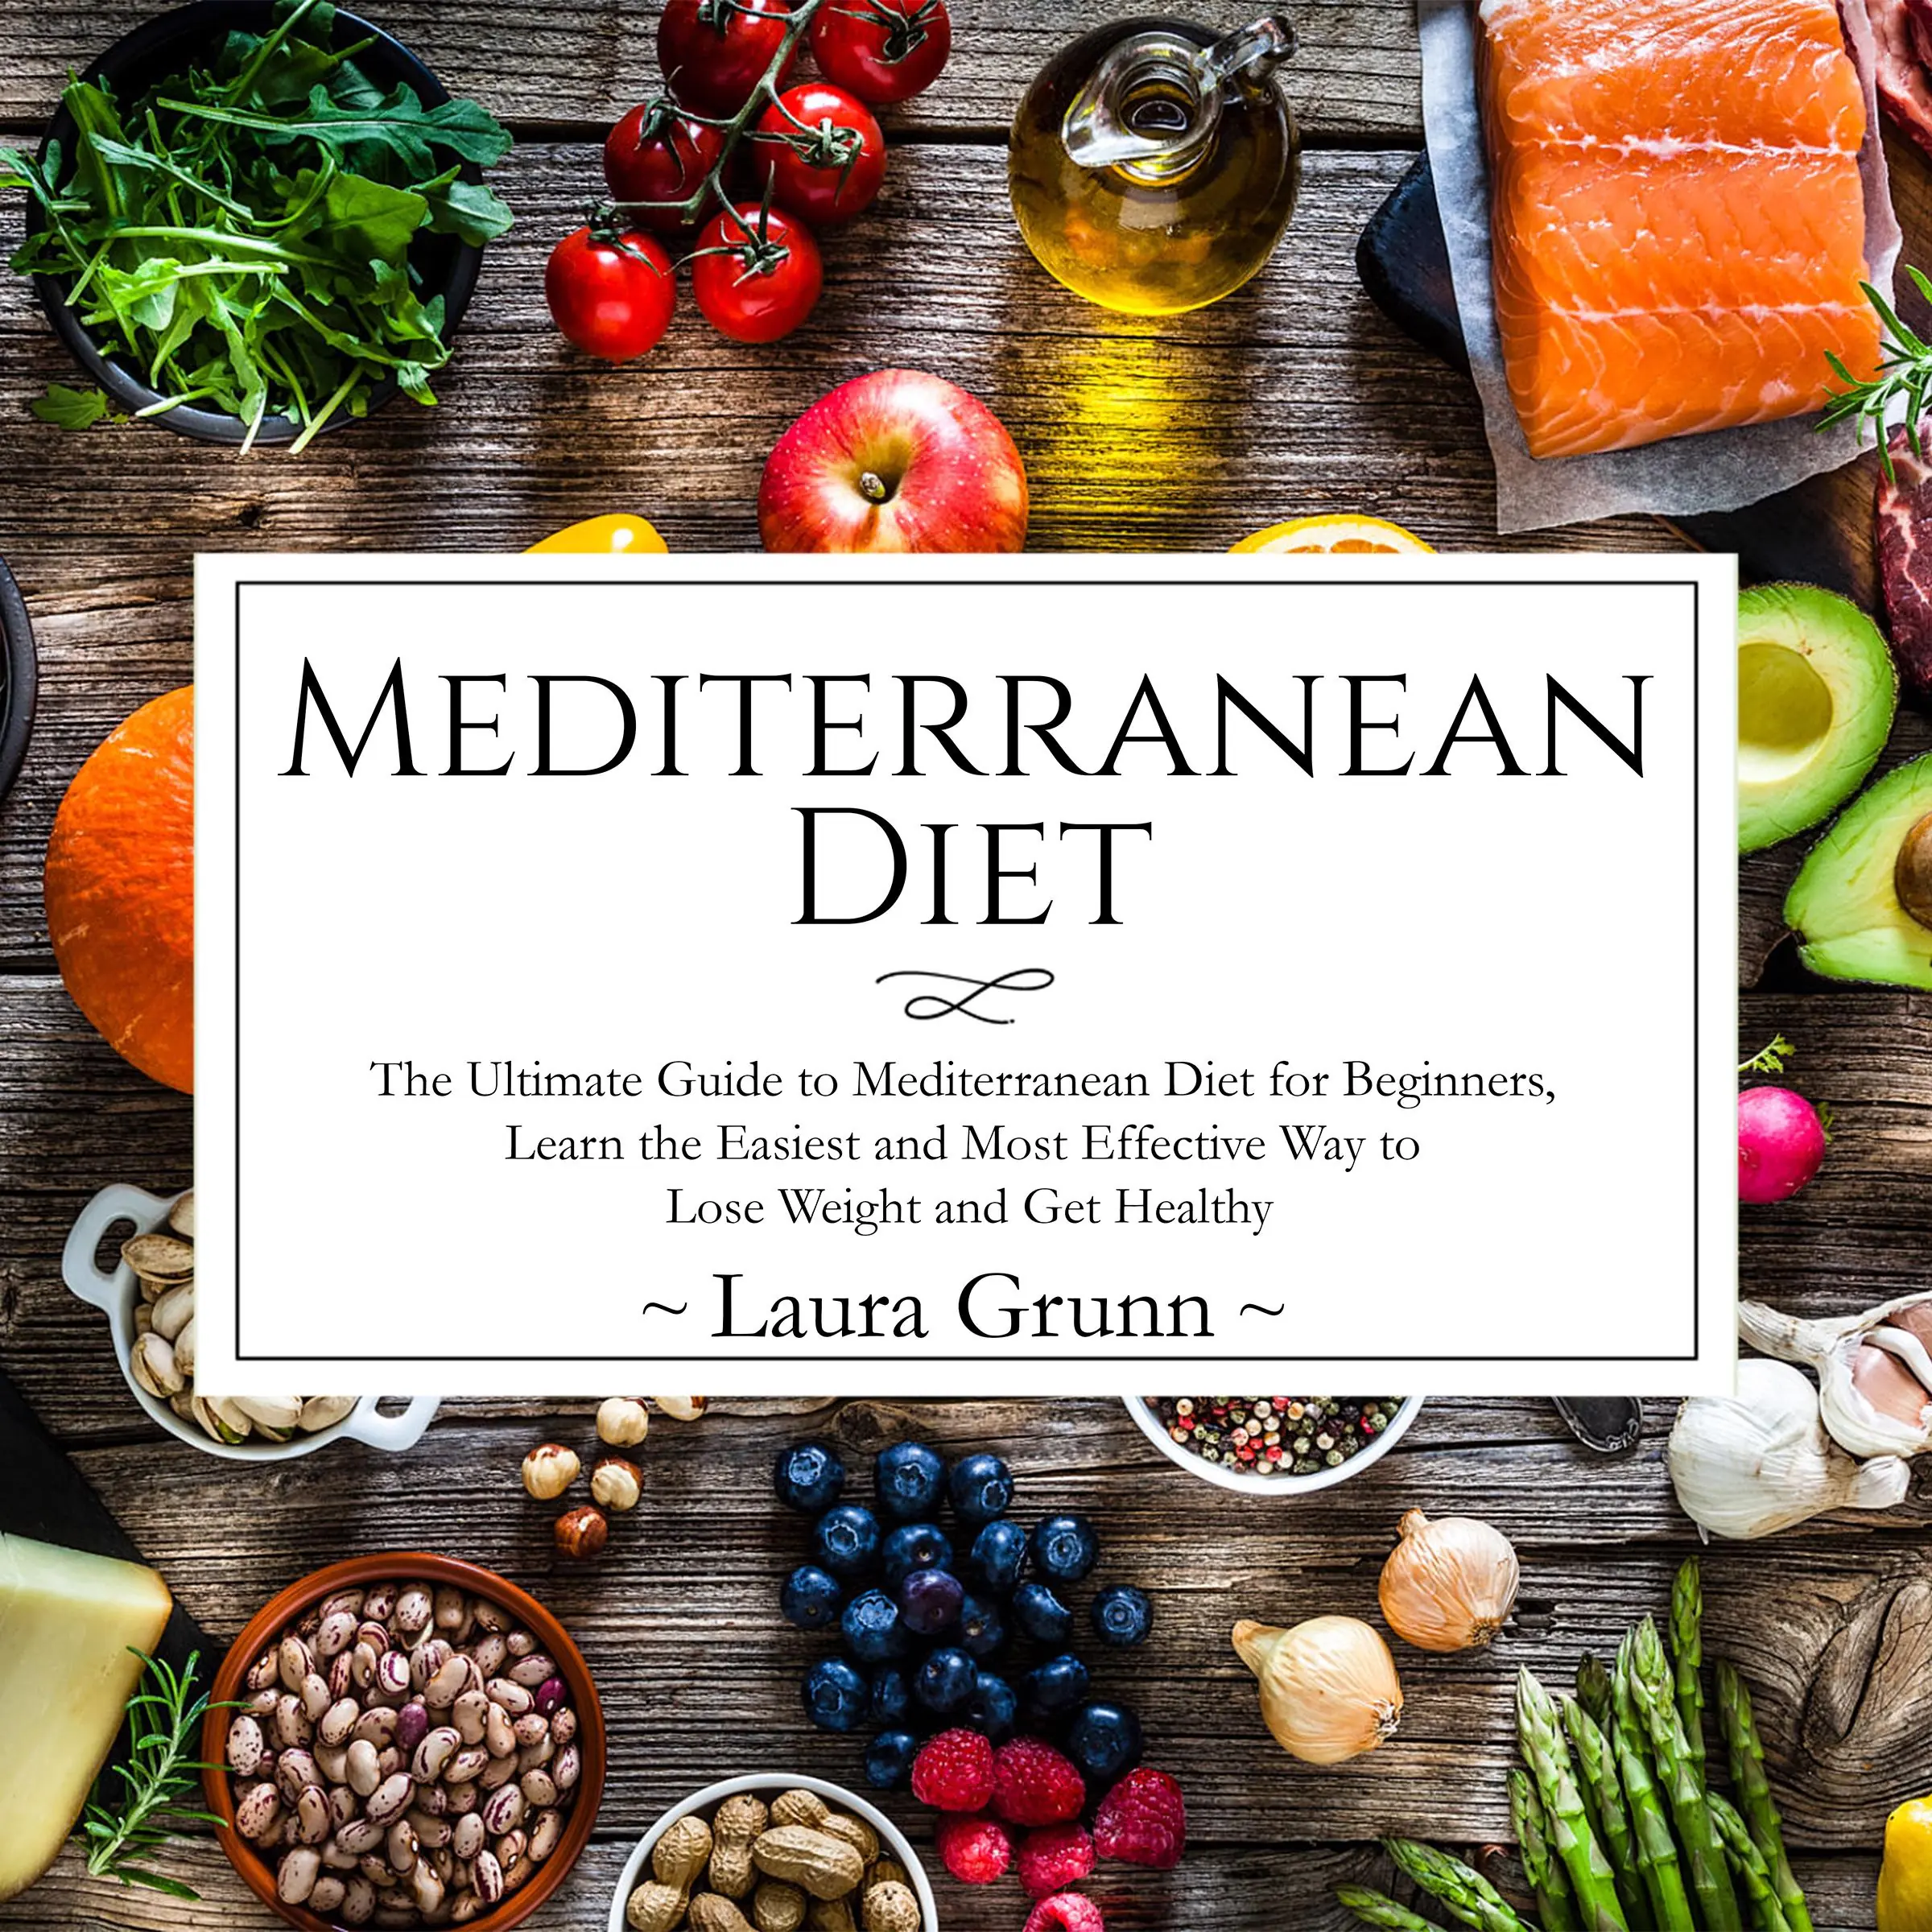 Mediterranean Diet: The Ultimate Guide to Mediterranean Diet for Beginners, Learn the Easiest and Most Effective Way to Lose Weight and Get Healthy Audiobook by Laura Grunn